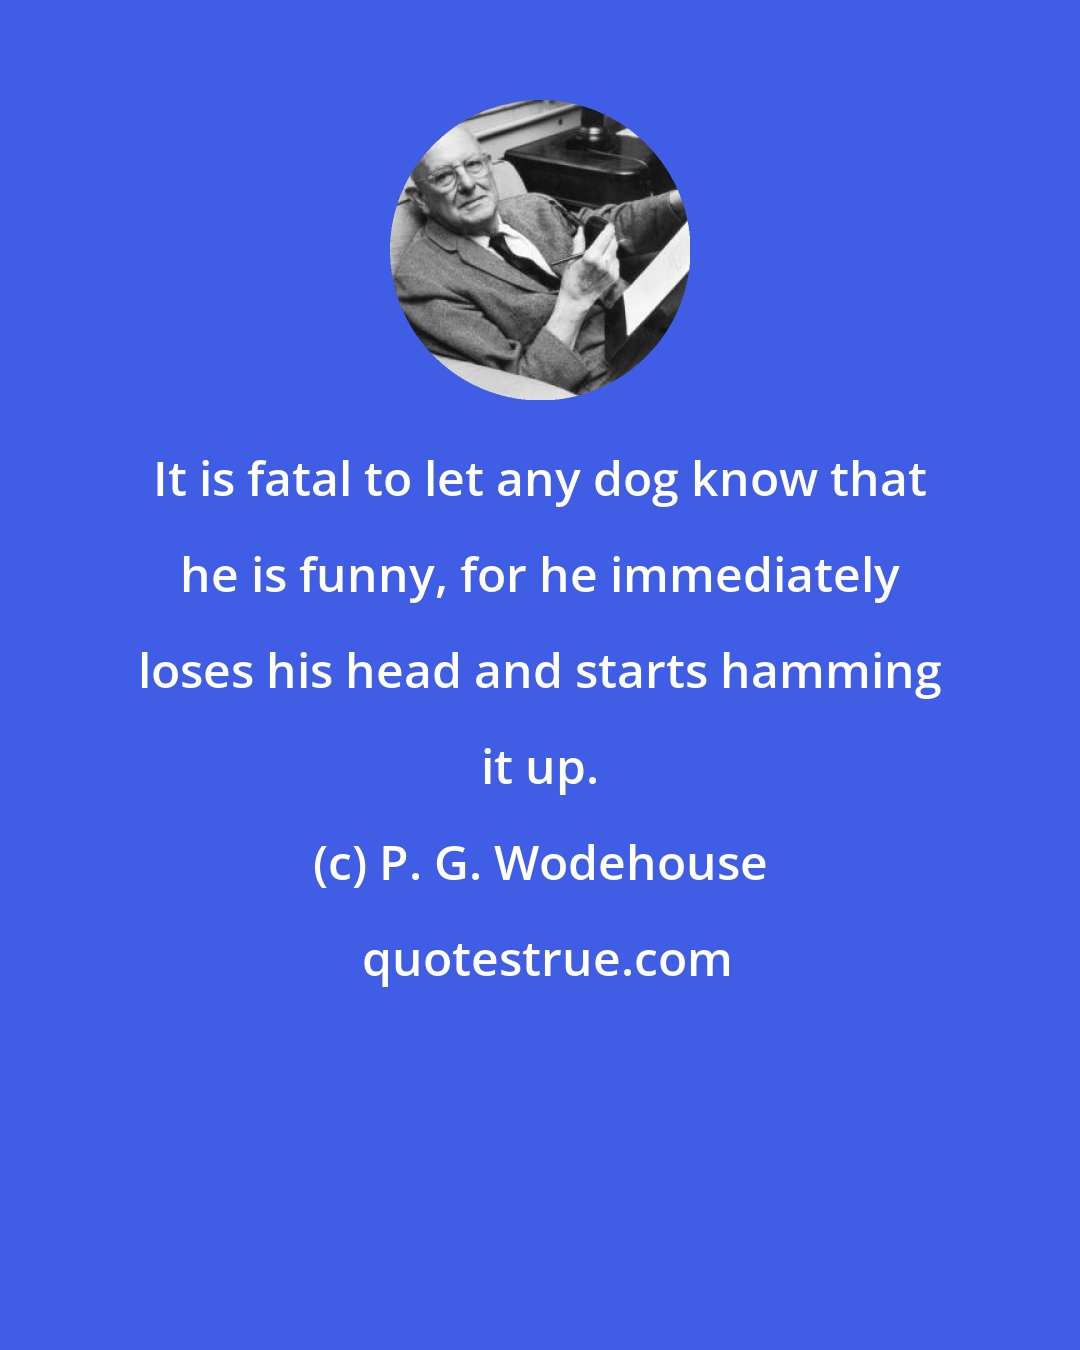 P. G. Wodehouse: It is fatal to let any dog know that he is funny, for he immediately loses his head and starts hamming it up.